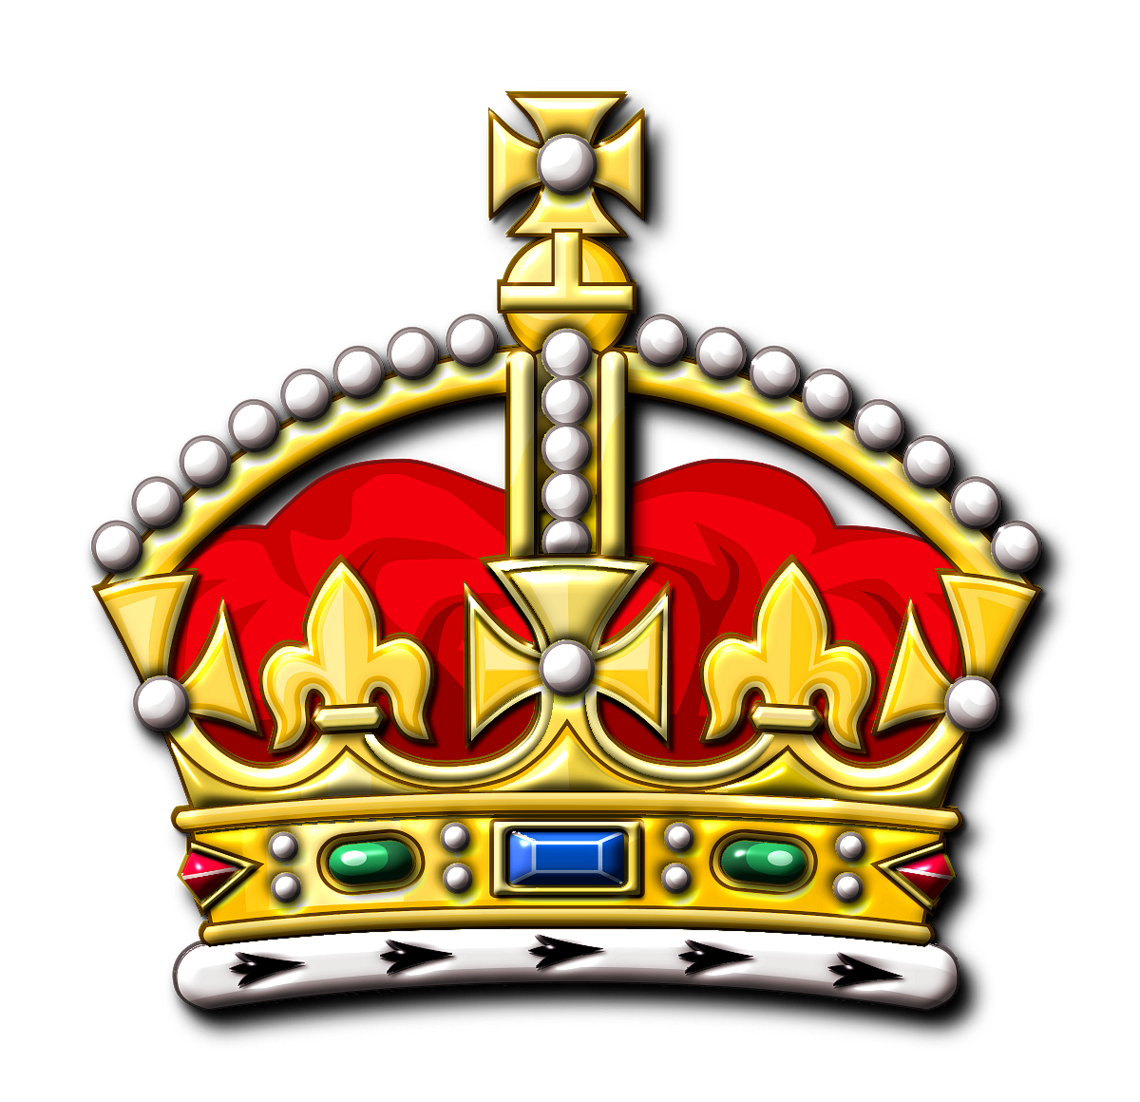 King Crown Logo Design ClipArt Best Clipart - Free to use Clip Art ...